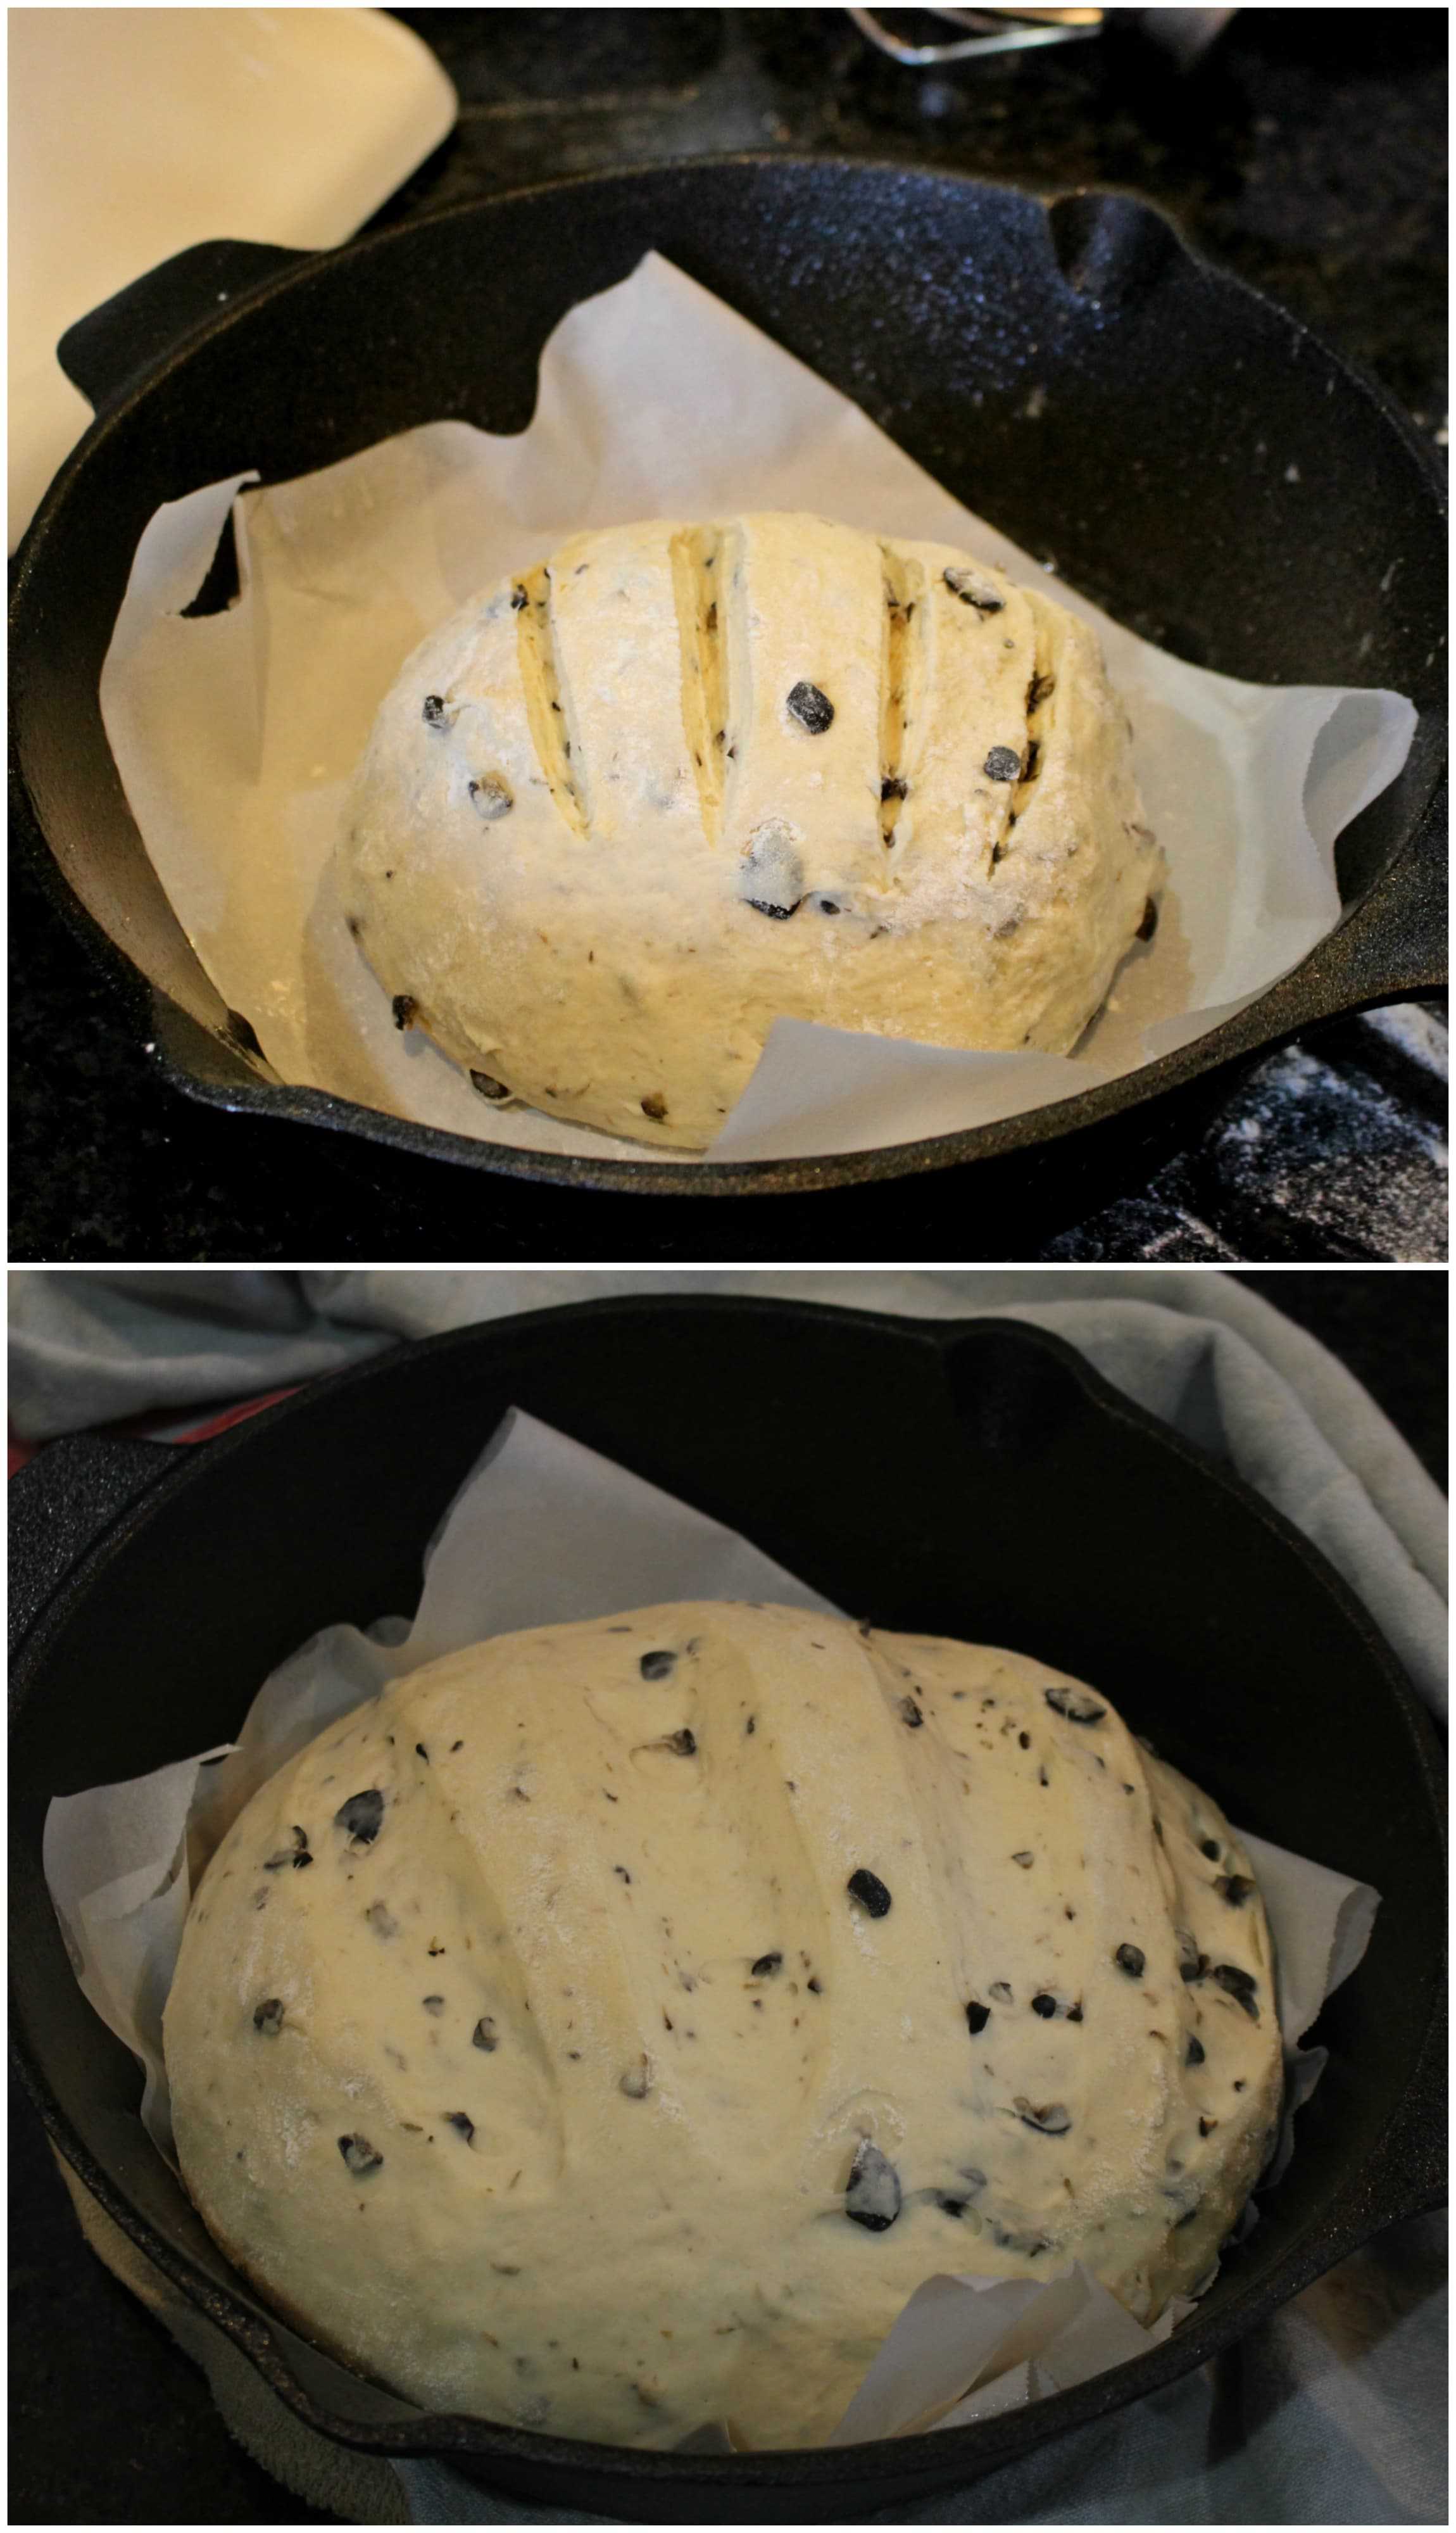 Dough proofing in a cast iron pan